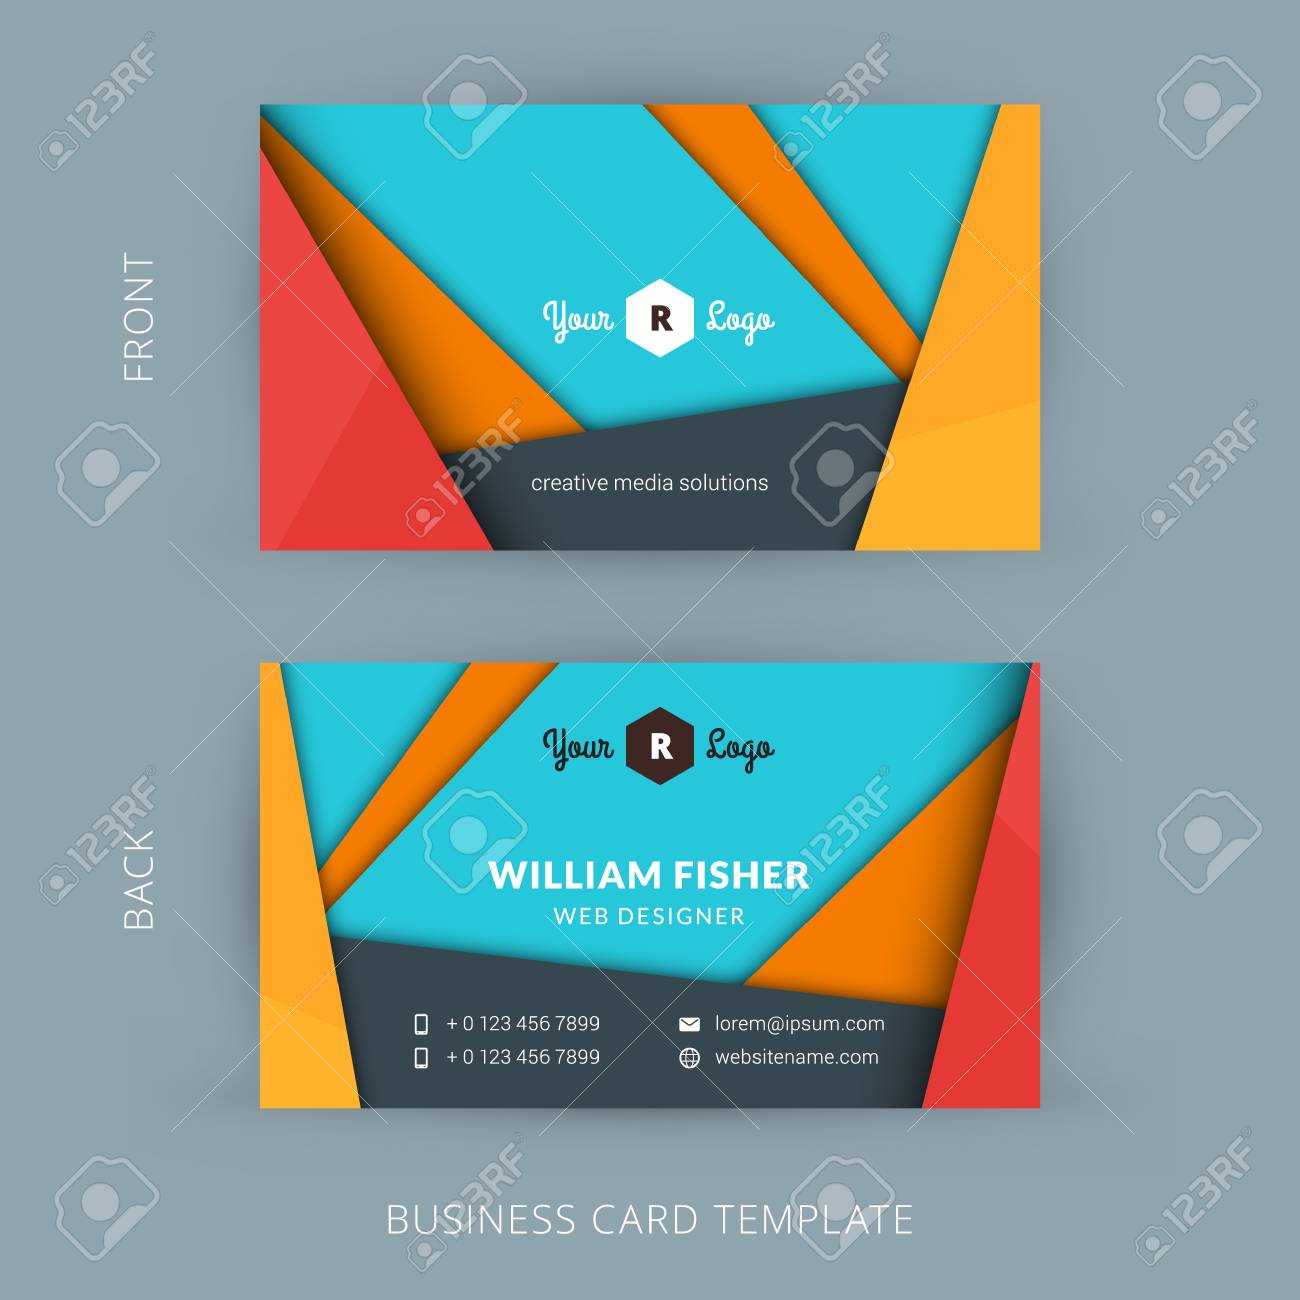 Creative And Clean Business Card Template With Material Design.. For Web Design Business Cards Templates